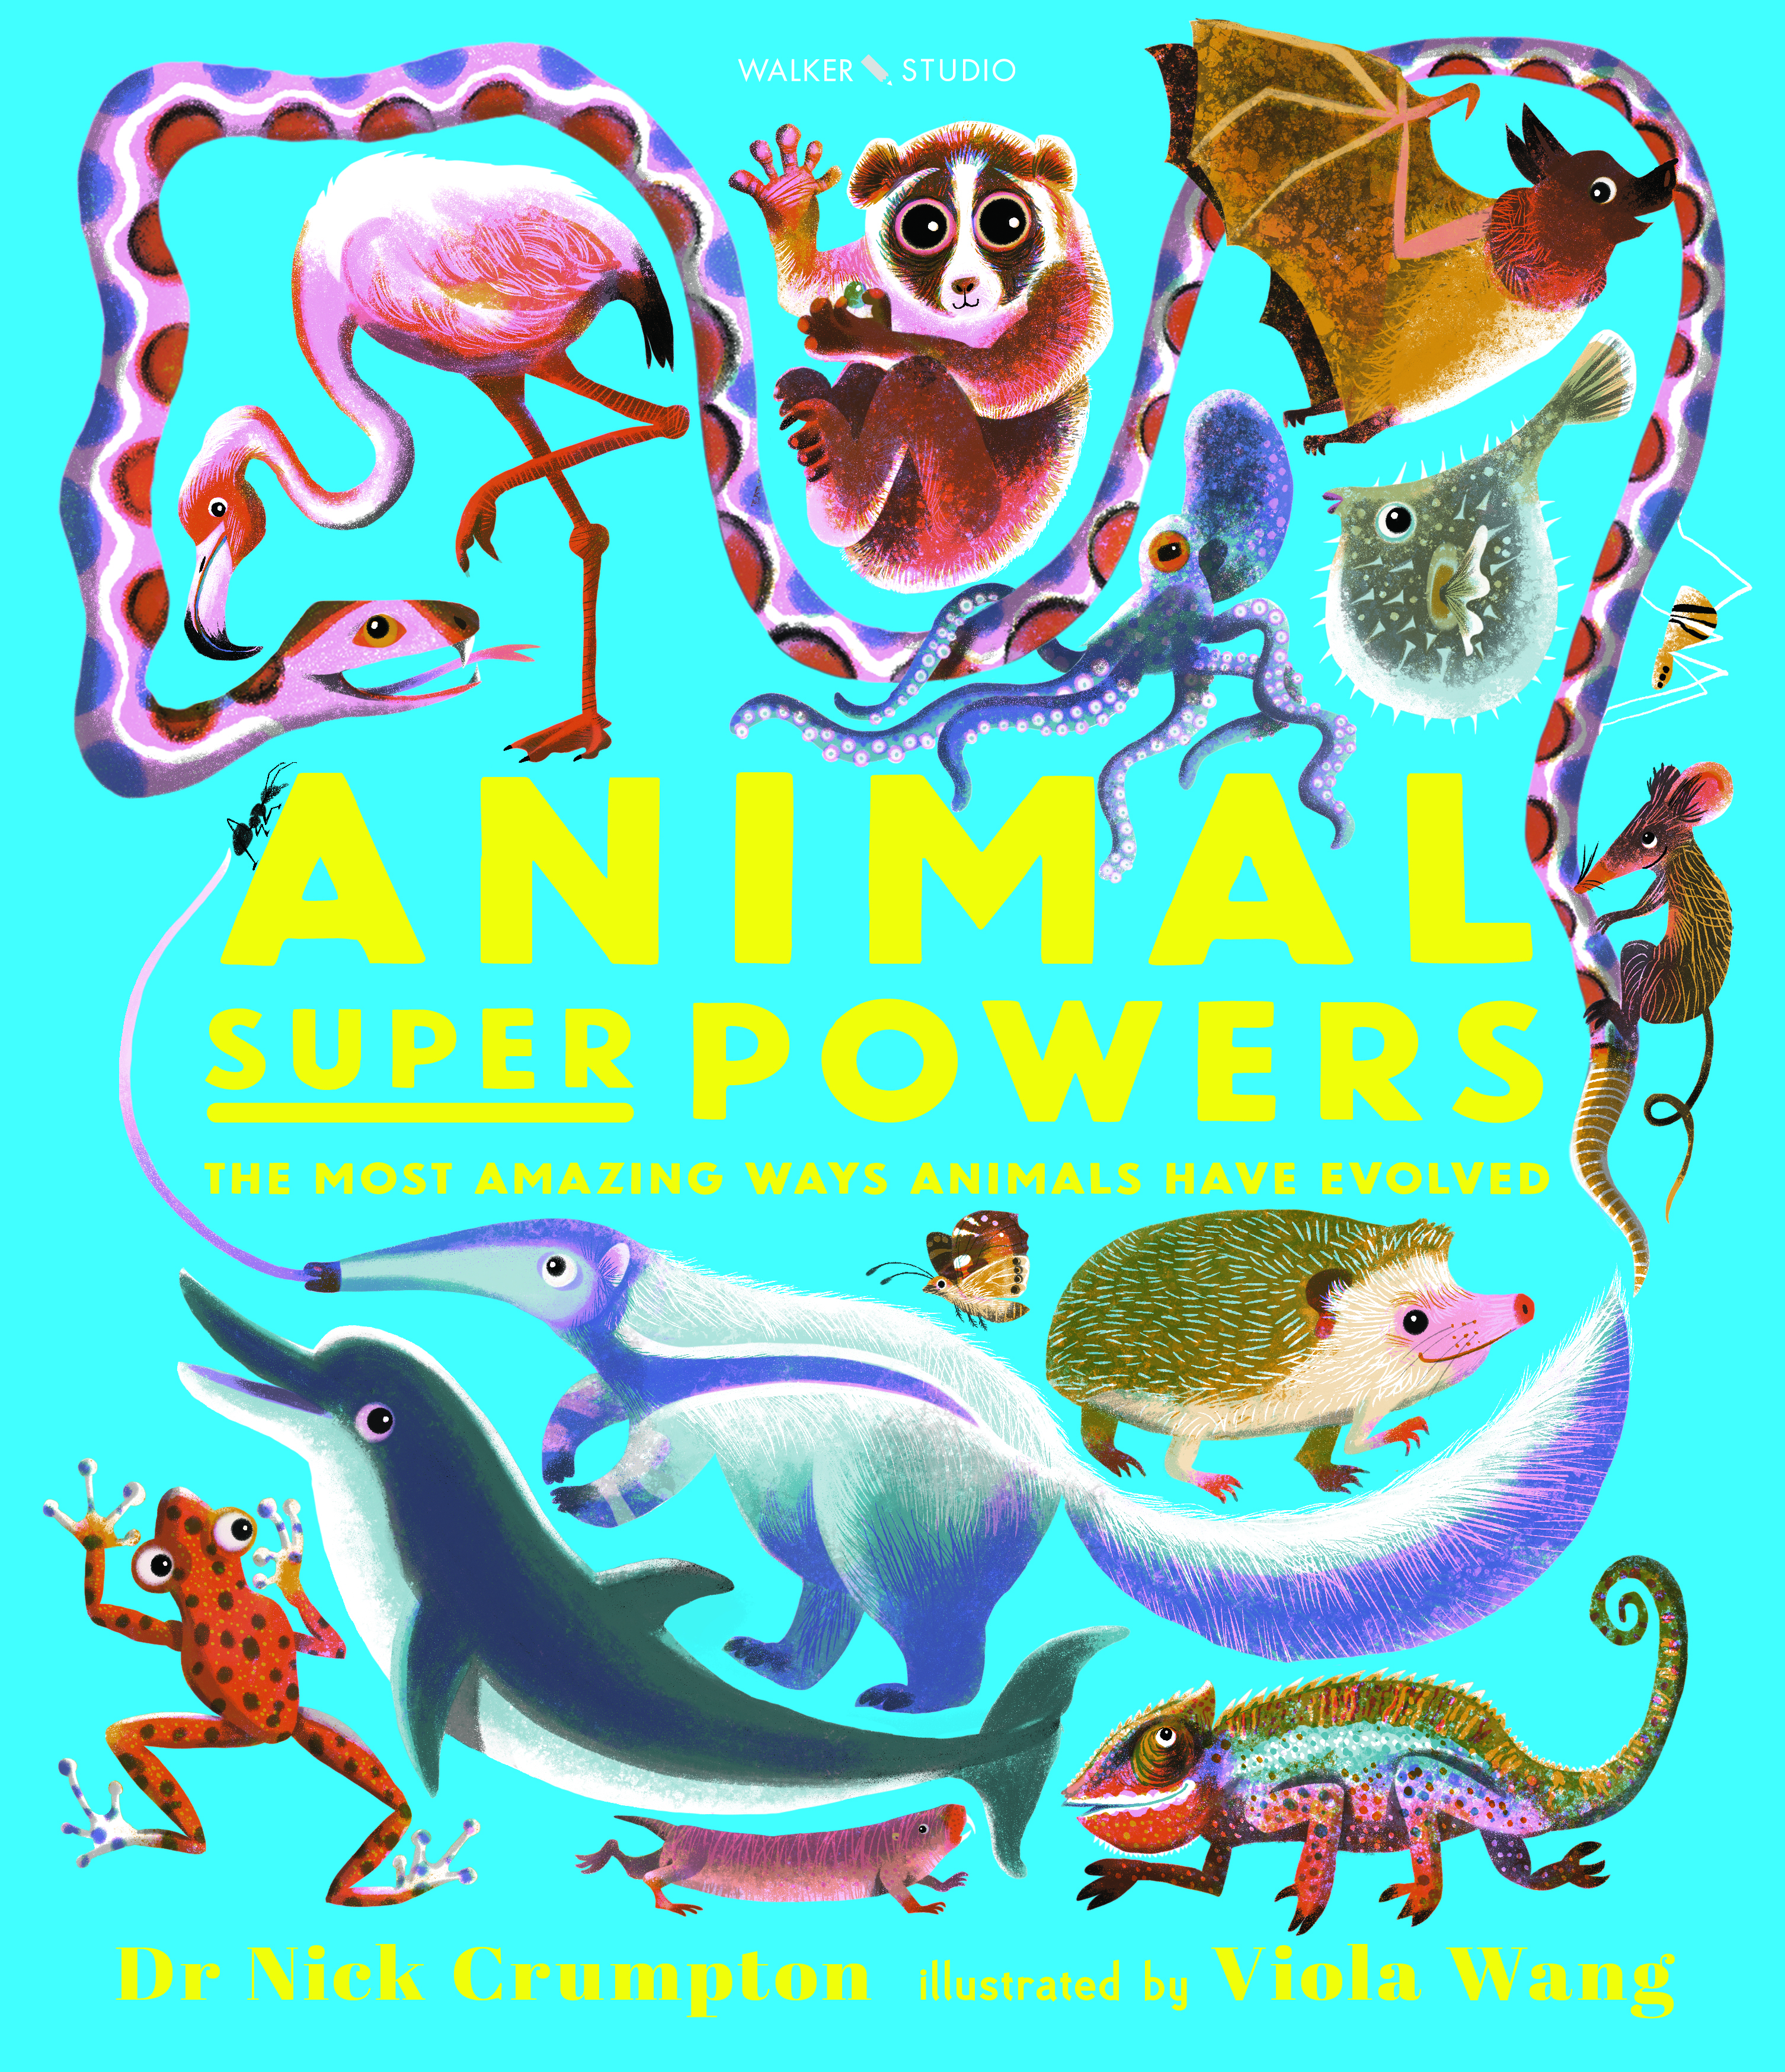 Animal-Super-Powers-The-Most-Amazing-Ways-Animals-Have-Evolved